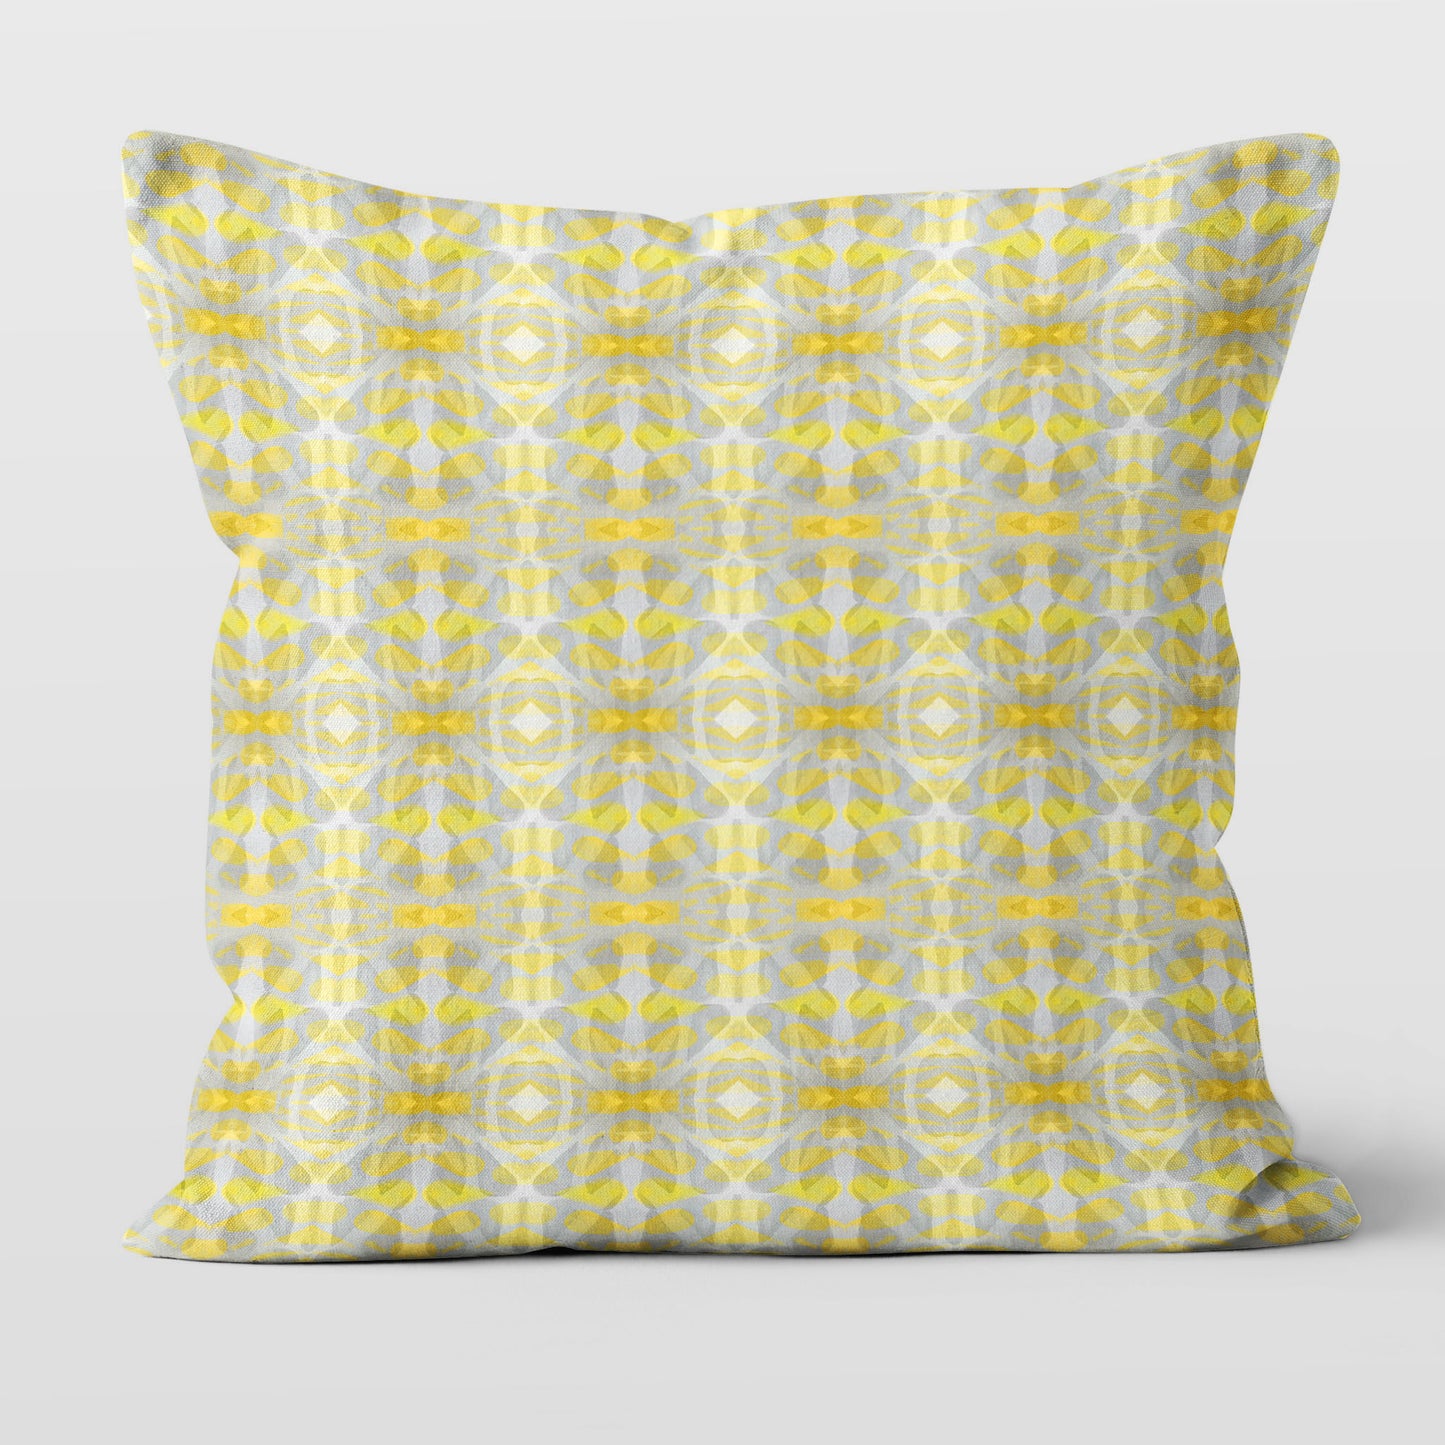 Square throw pillow featuring a yellow and gray abstract pattern